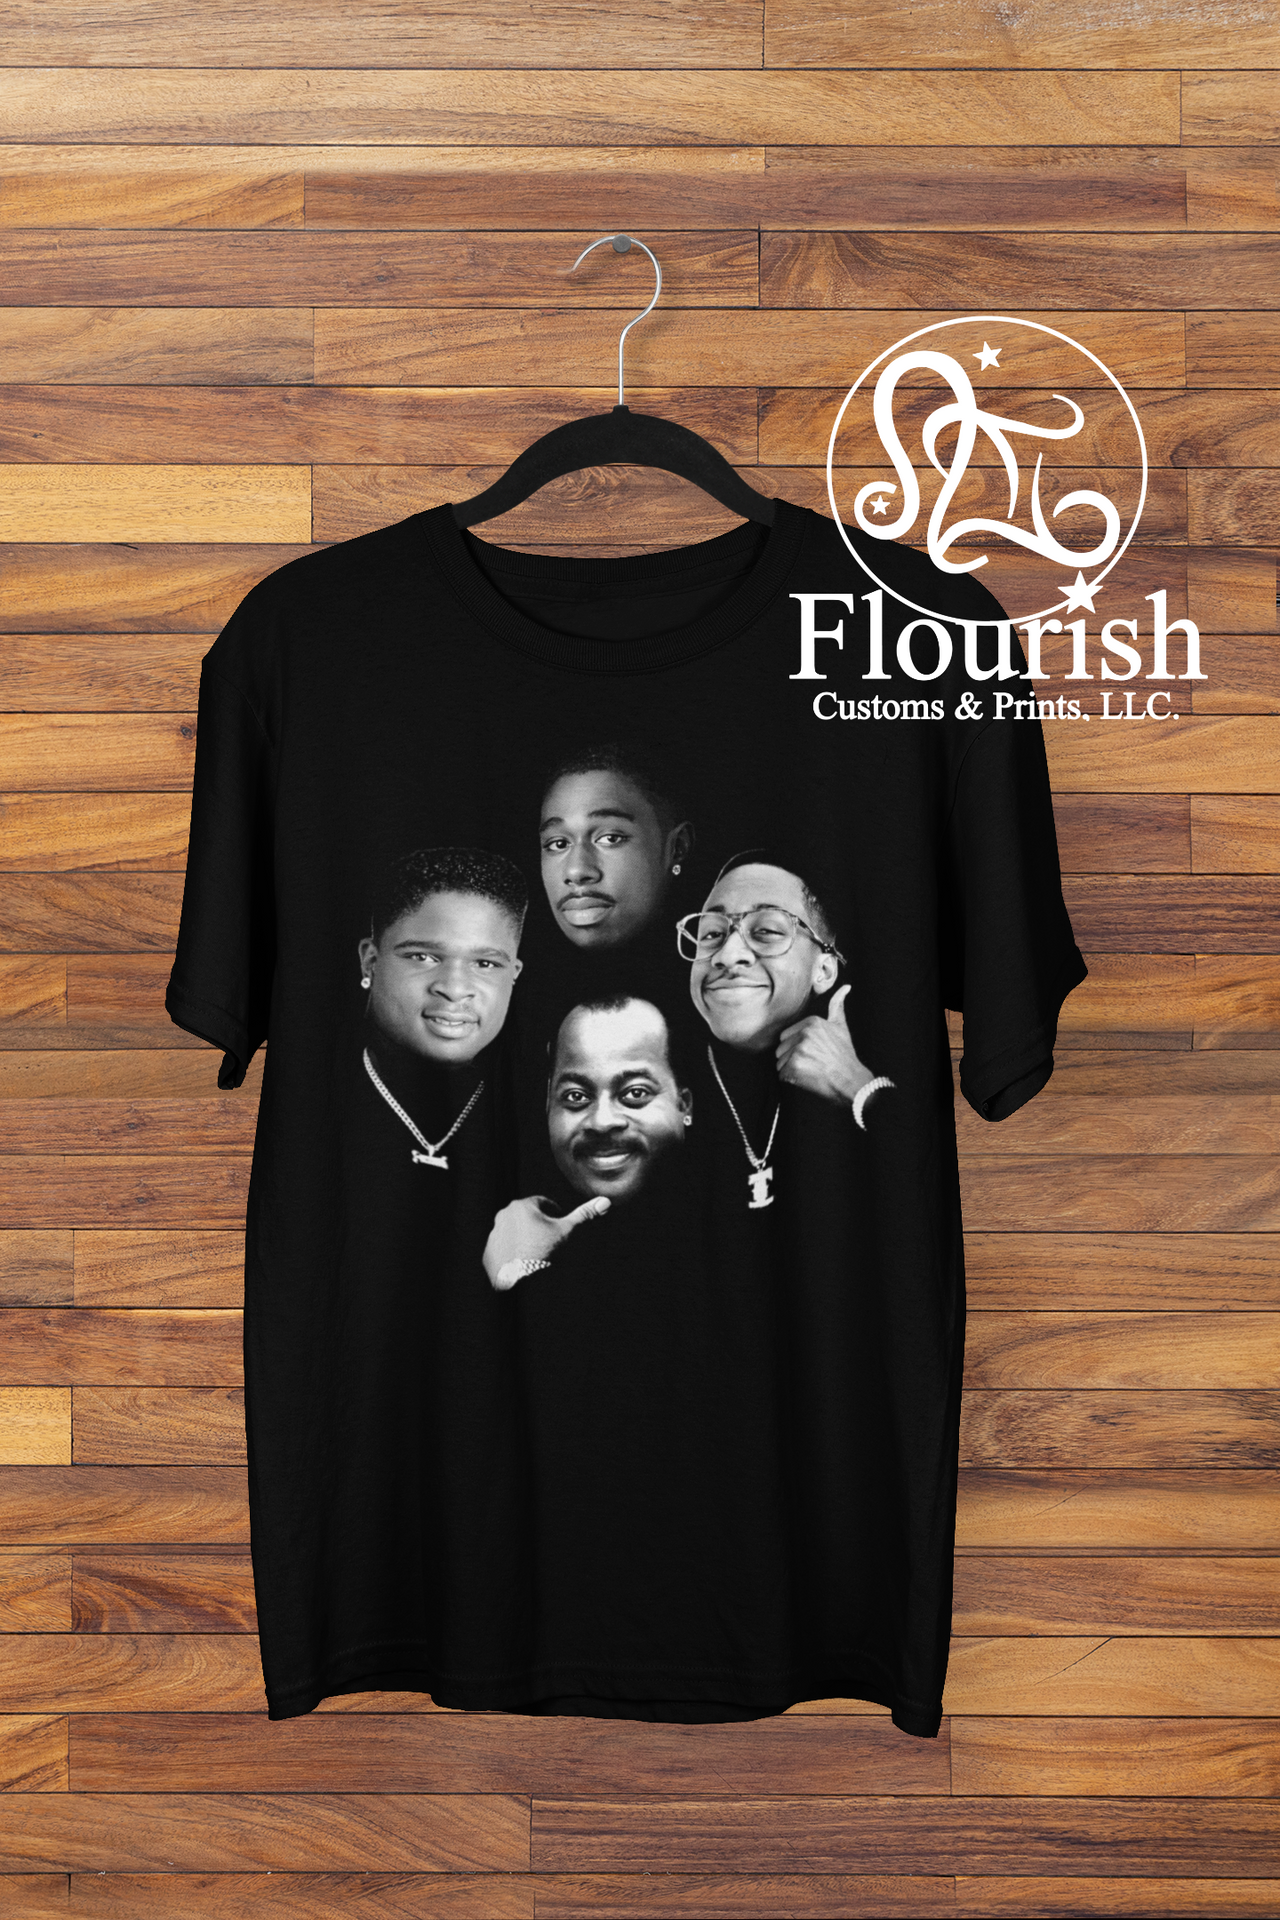 Family Matters Male Icons (Black Only) Tee